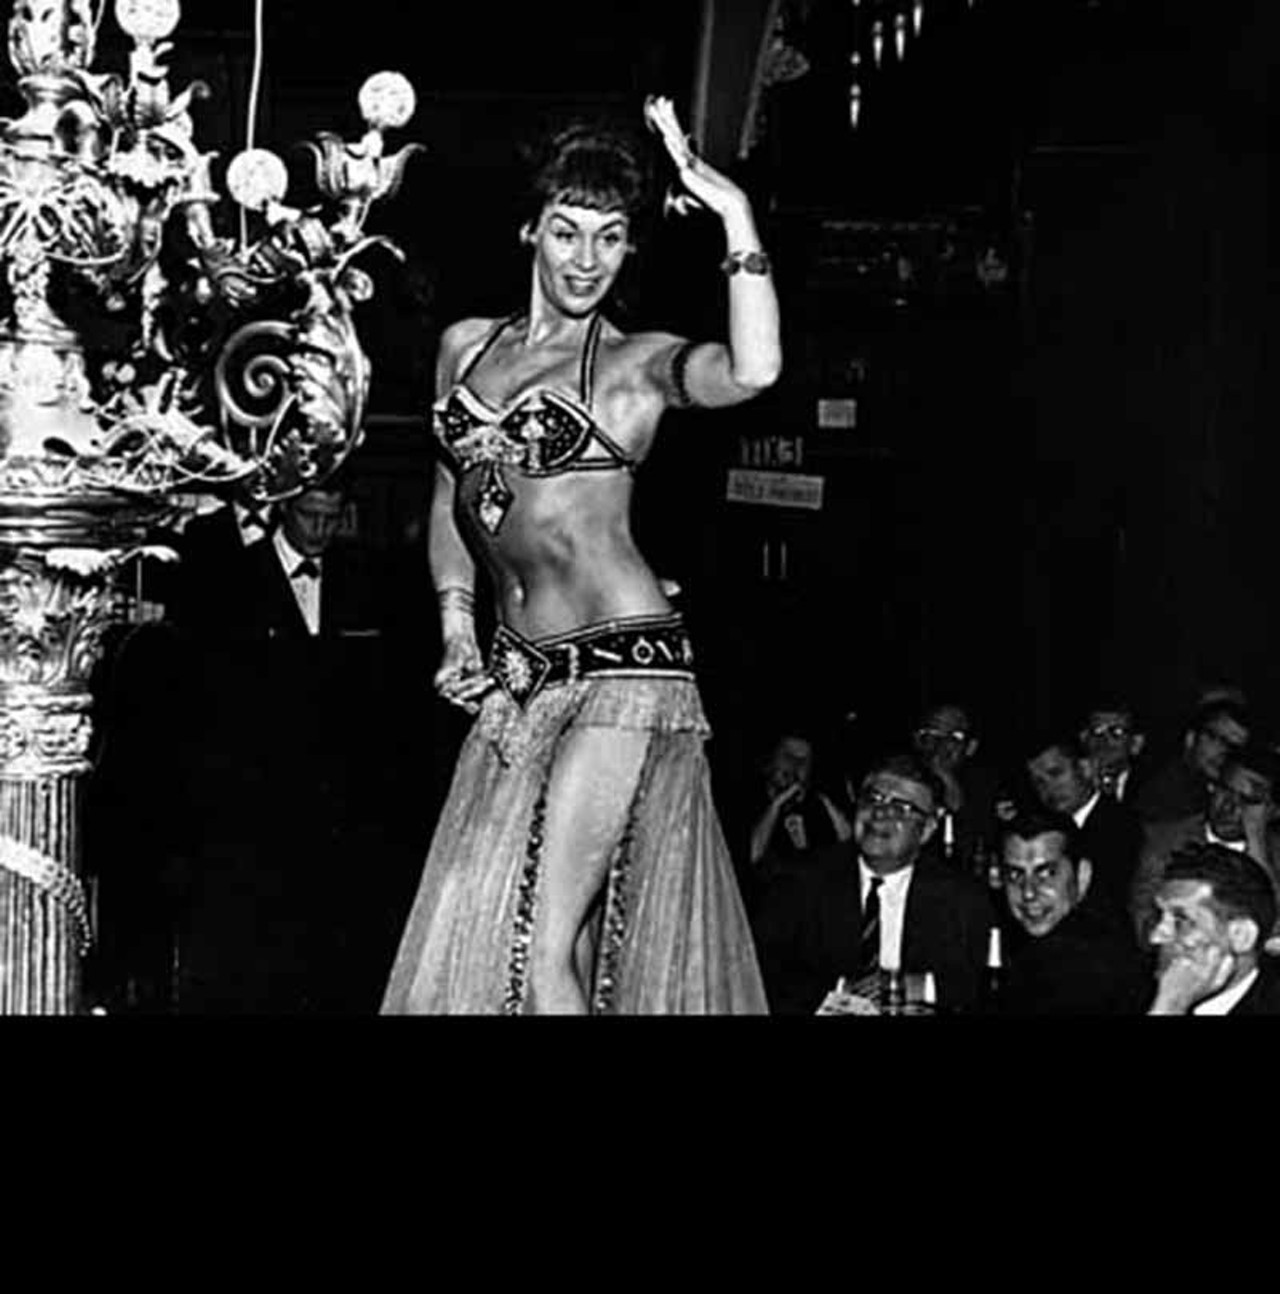 A belly dancer at the Crystal Palace, a cabaret theater.